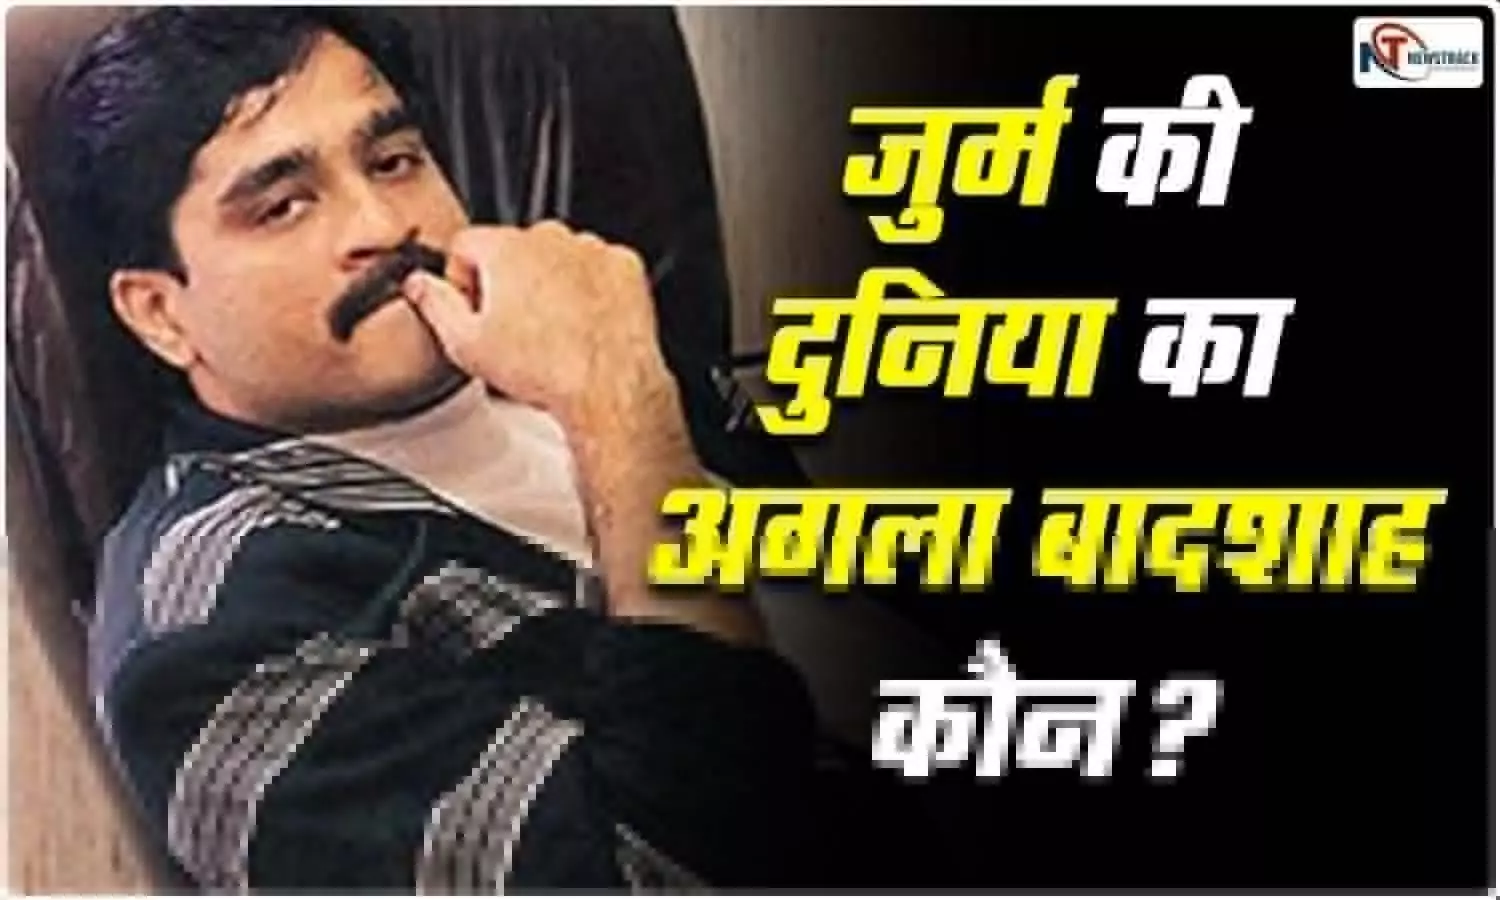 Who is the king of the world of crime after Dawood Ibrahim?